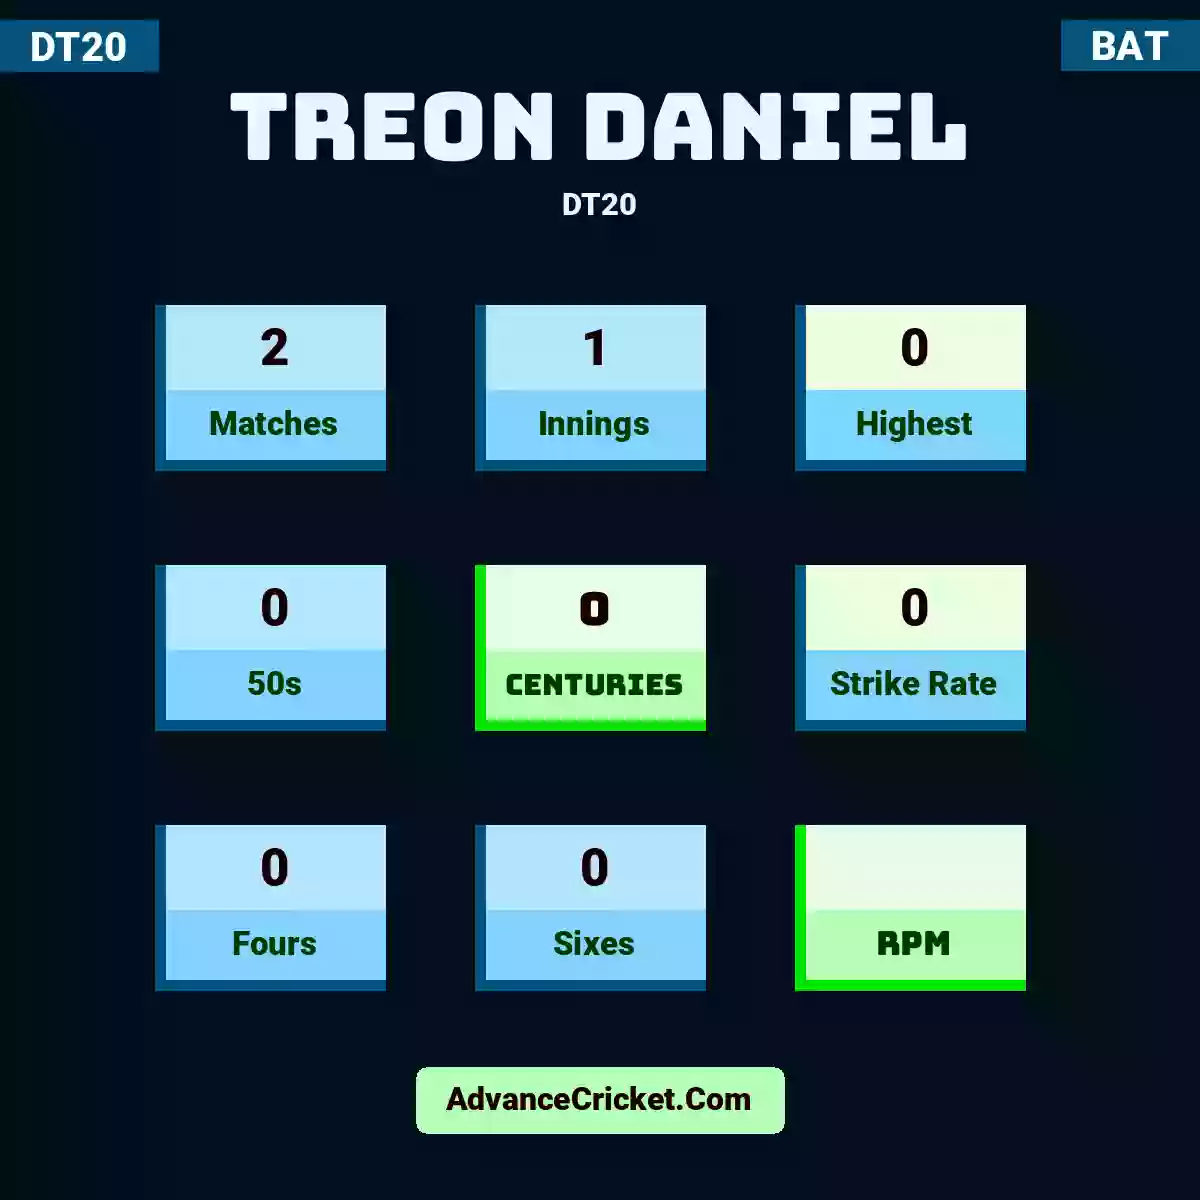 Treon Daniel DT20 , Treon Daniel played 2 matches, scored 0 runs as highest, 0 half-centuries, and 0 centuries, with a strike rate of 0. T.Daniel hit 0 fours and 0 sixes.